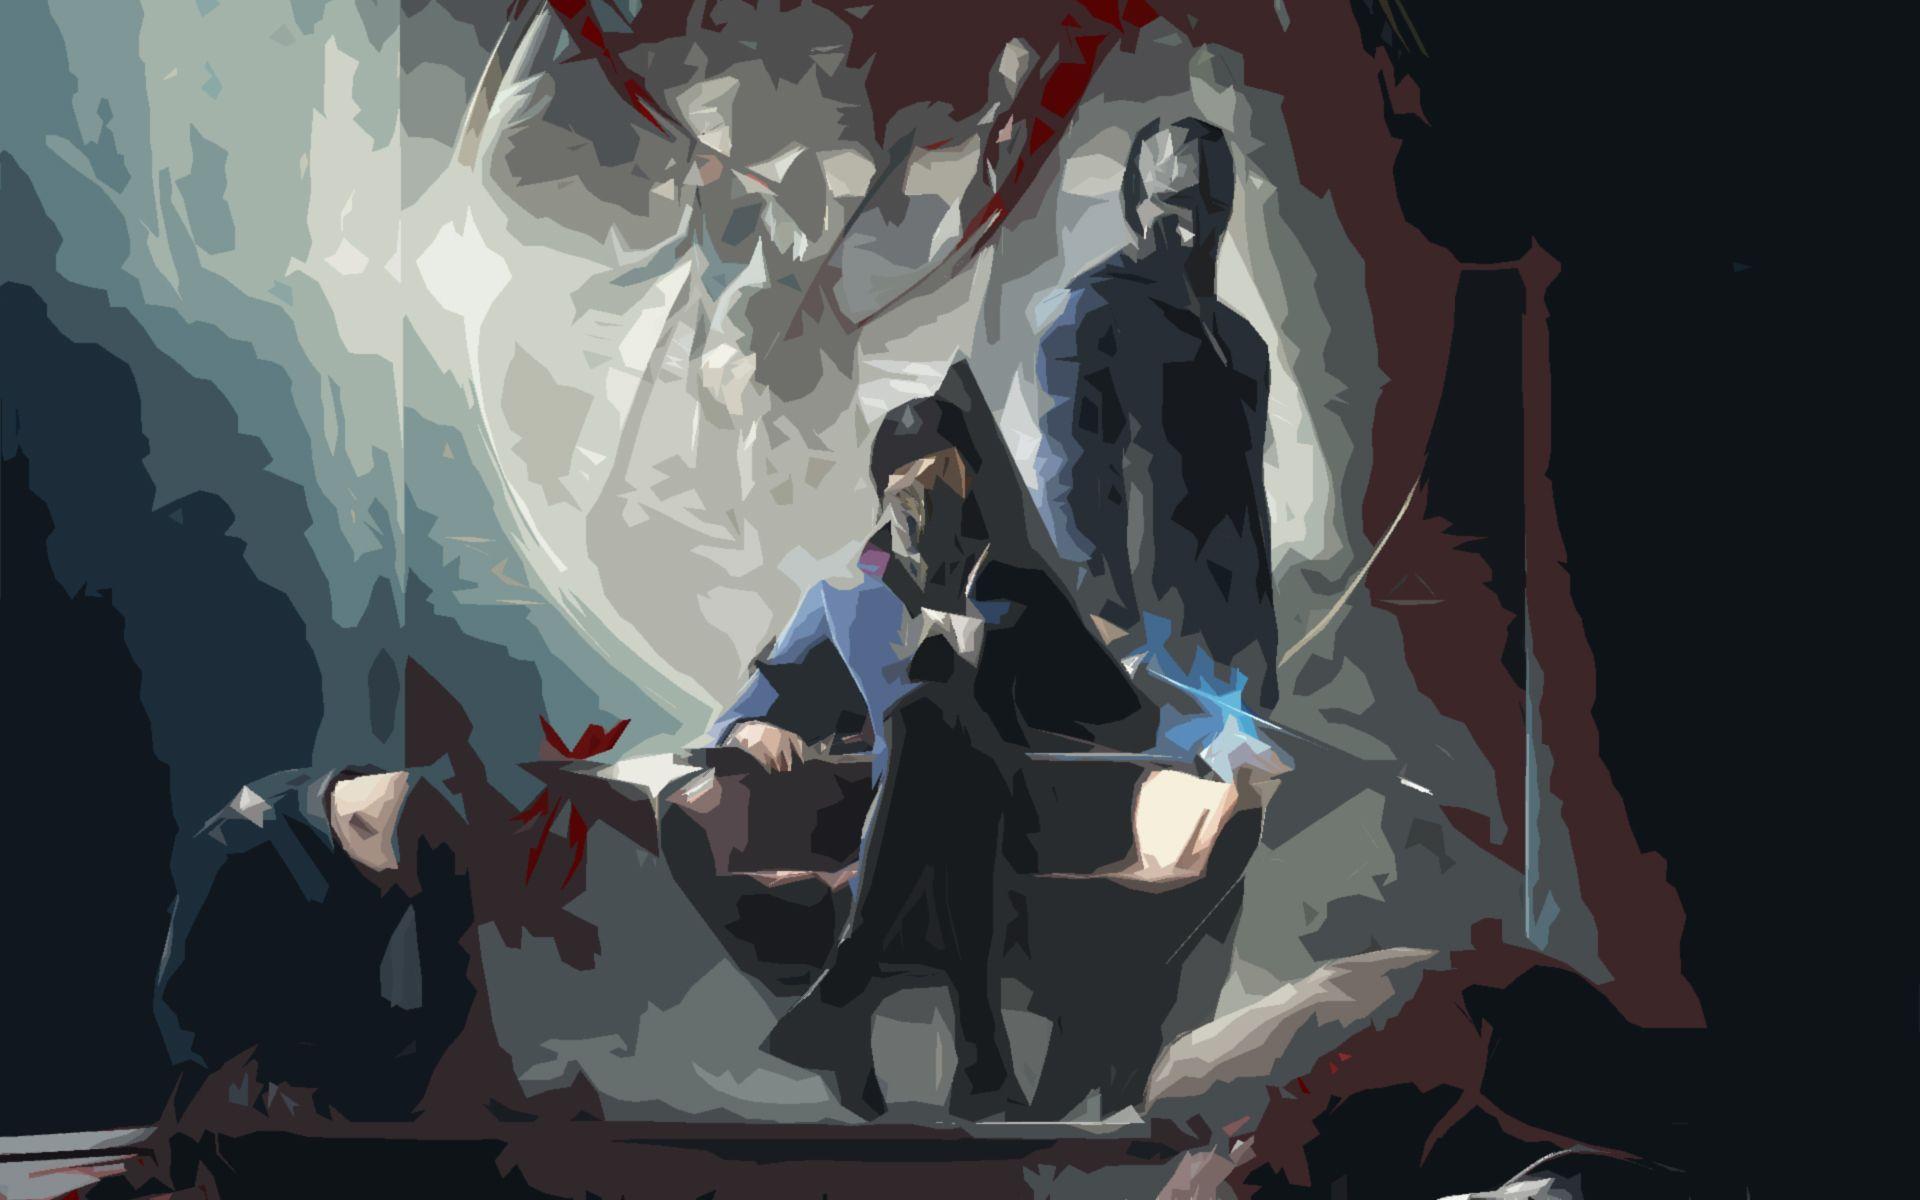 Some Dishonored and Dishonored 2 wallpaper I made free for use